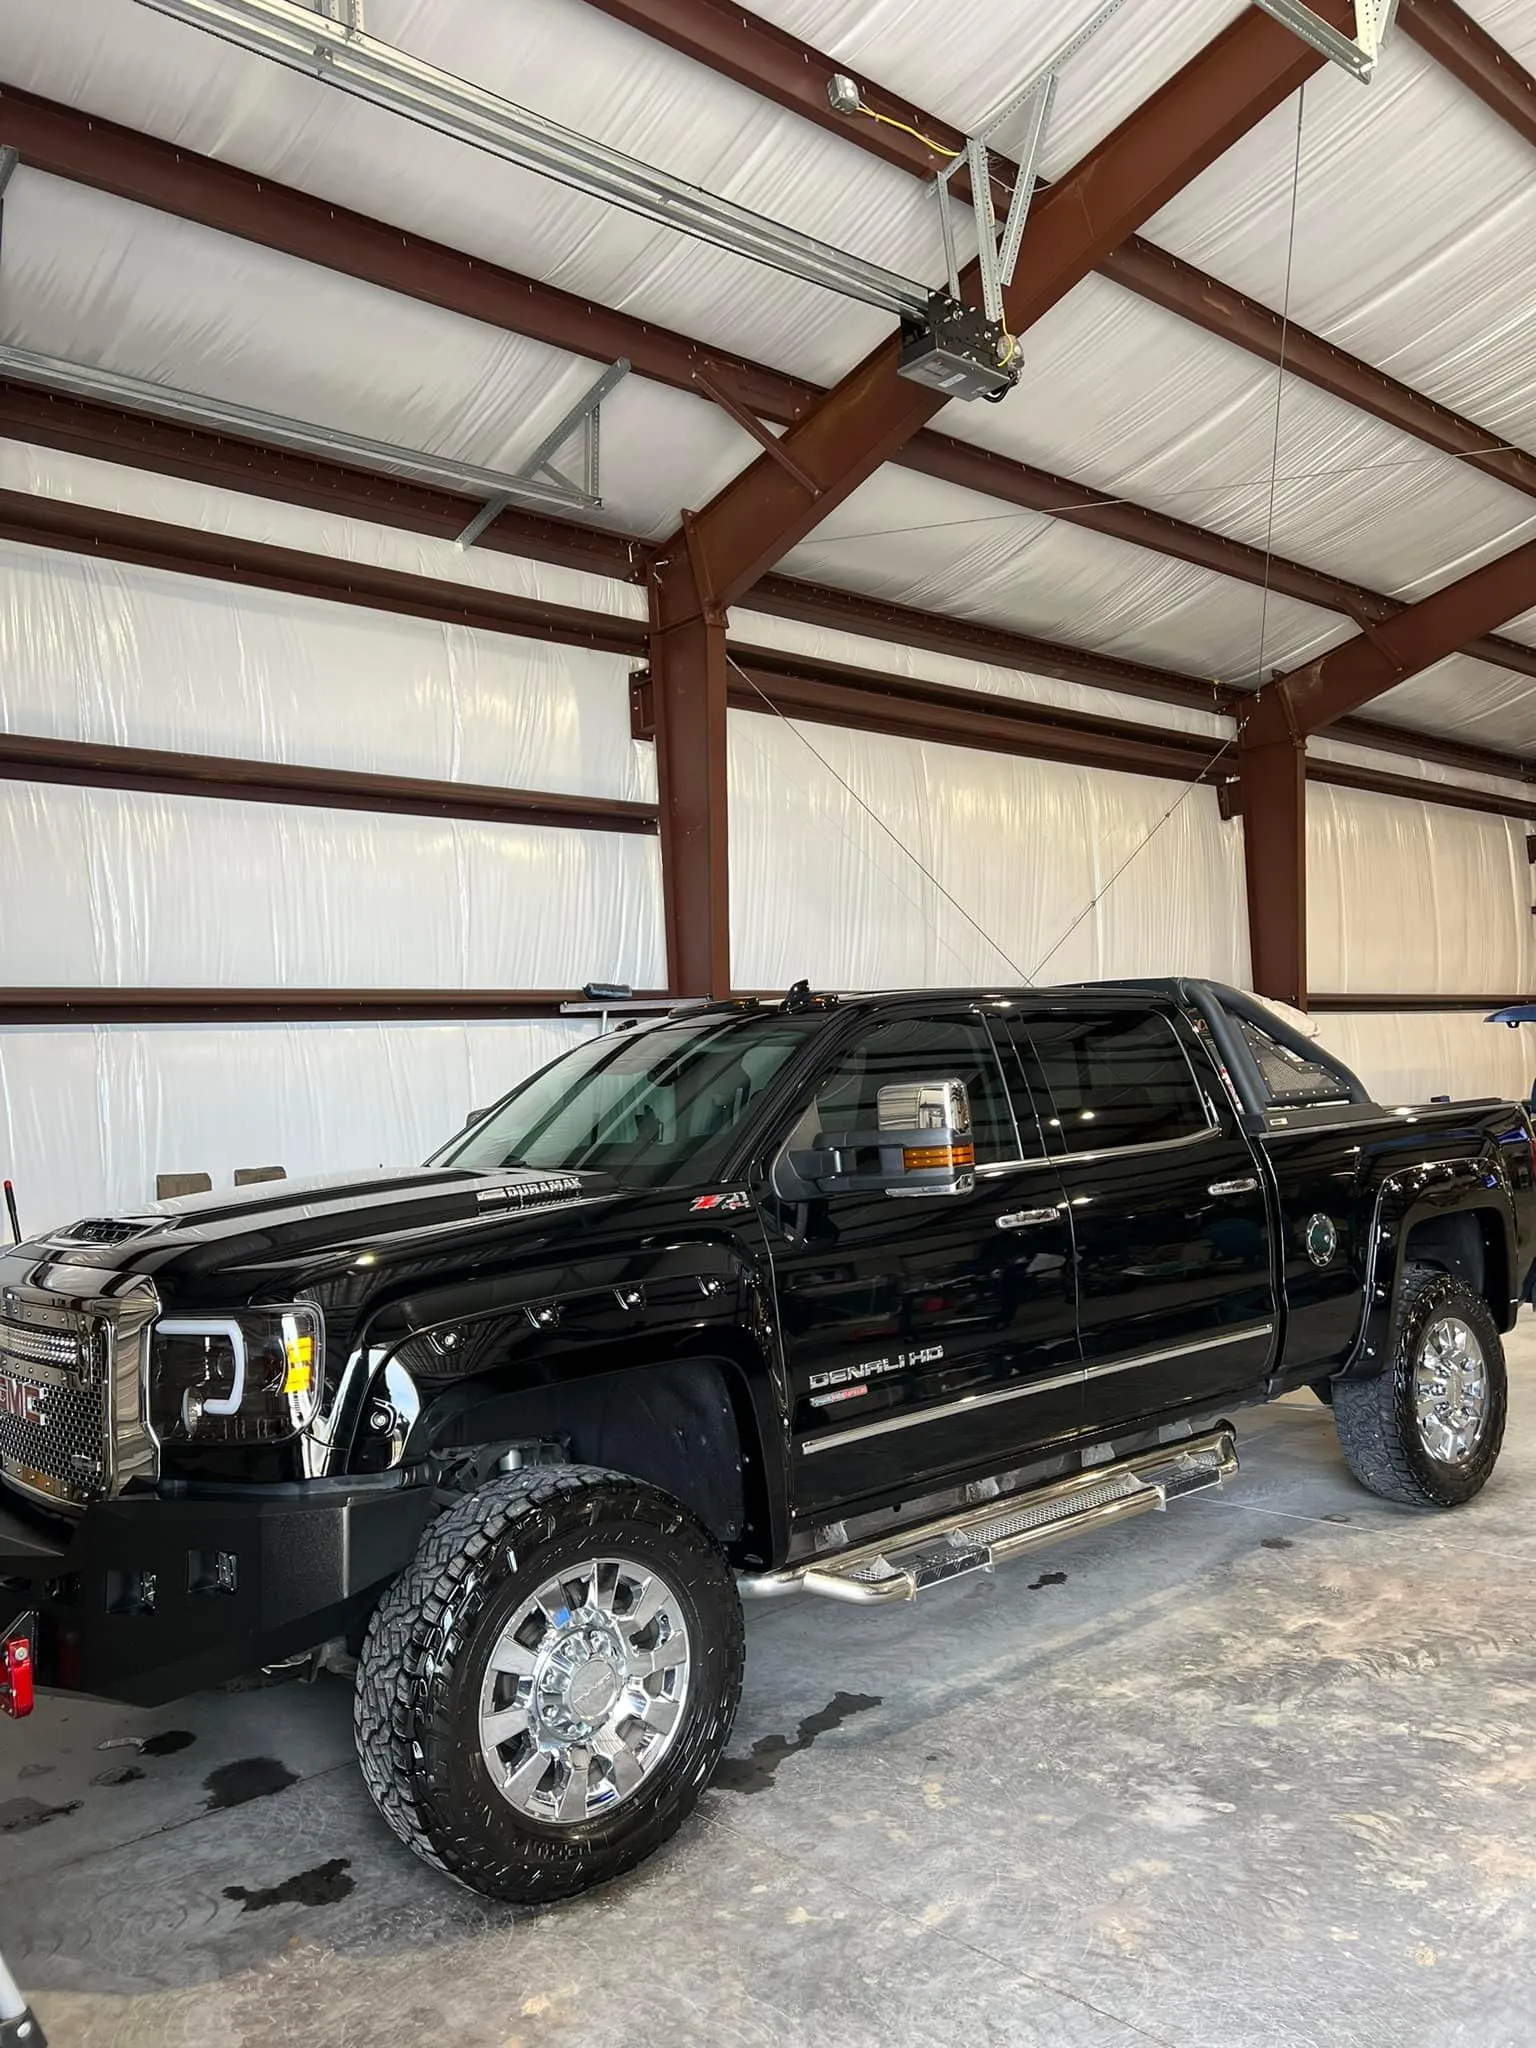 Gold Package for Relentless Shine Mobile Detailing in Calabash, NC